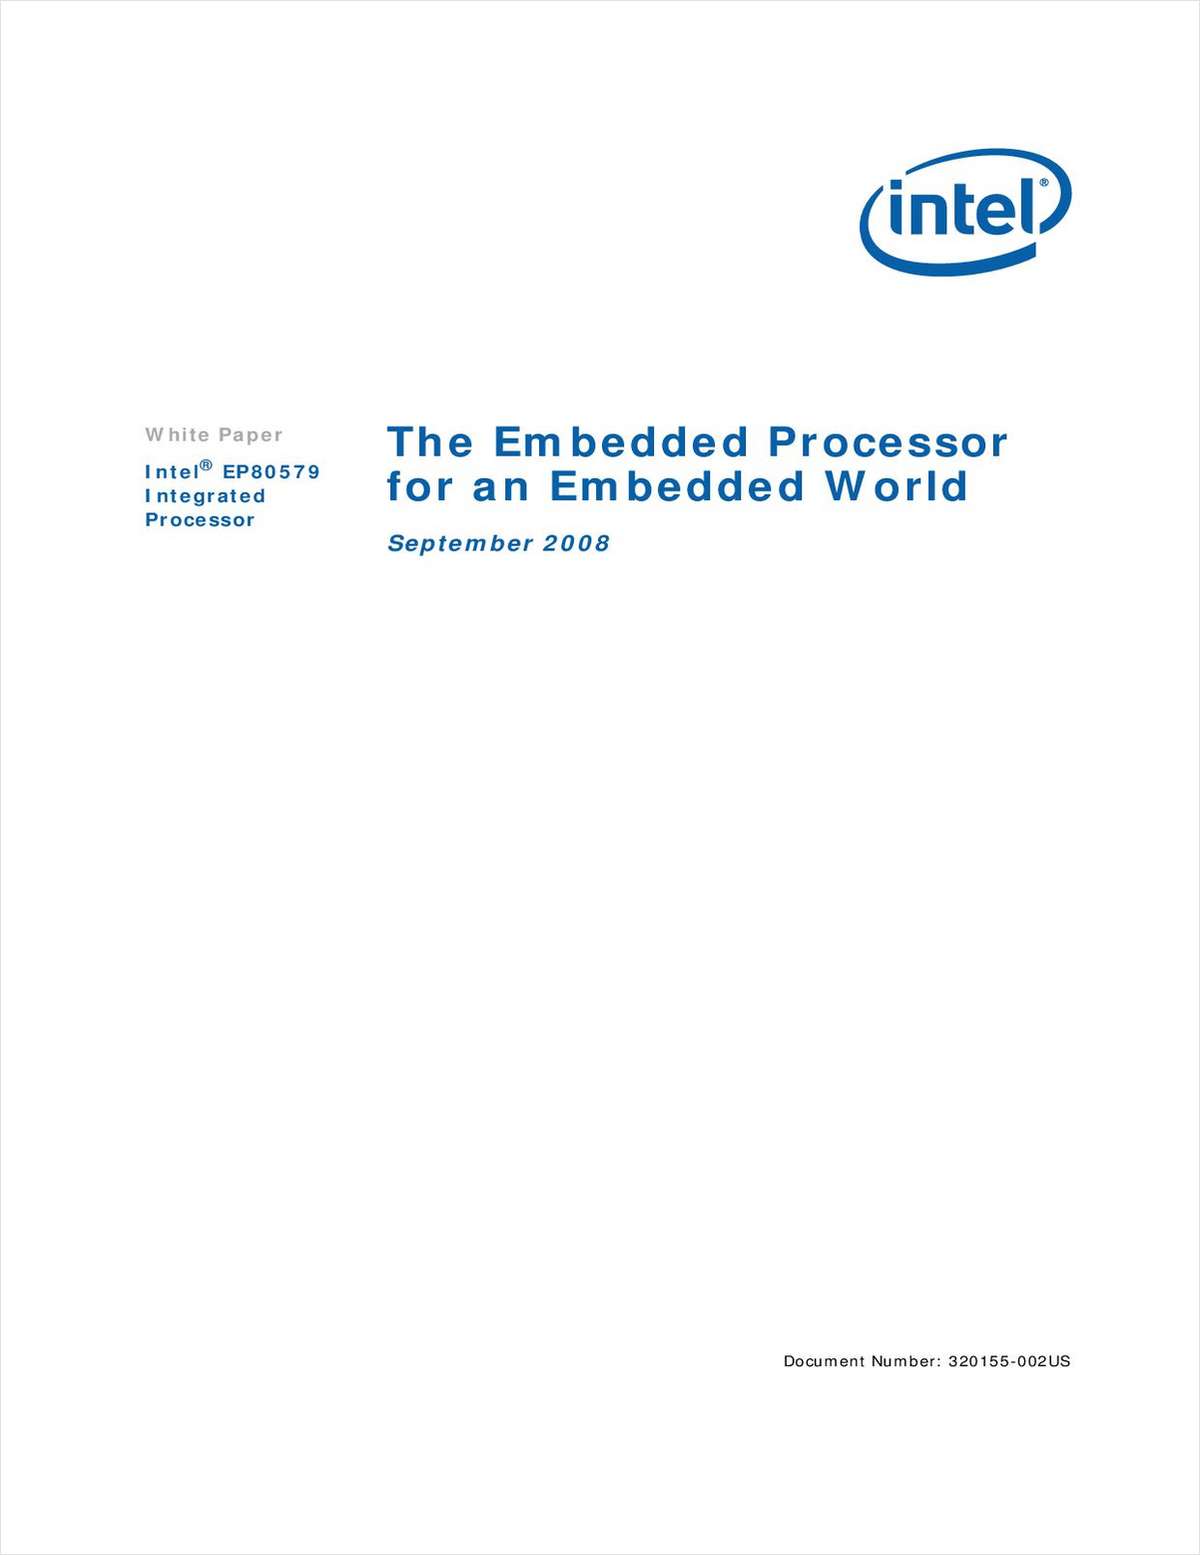 The Embedded Processor for an Embedded World